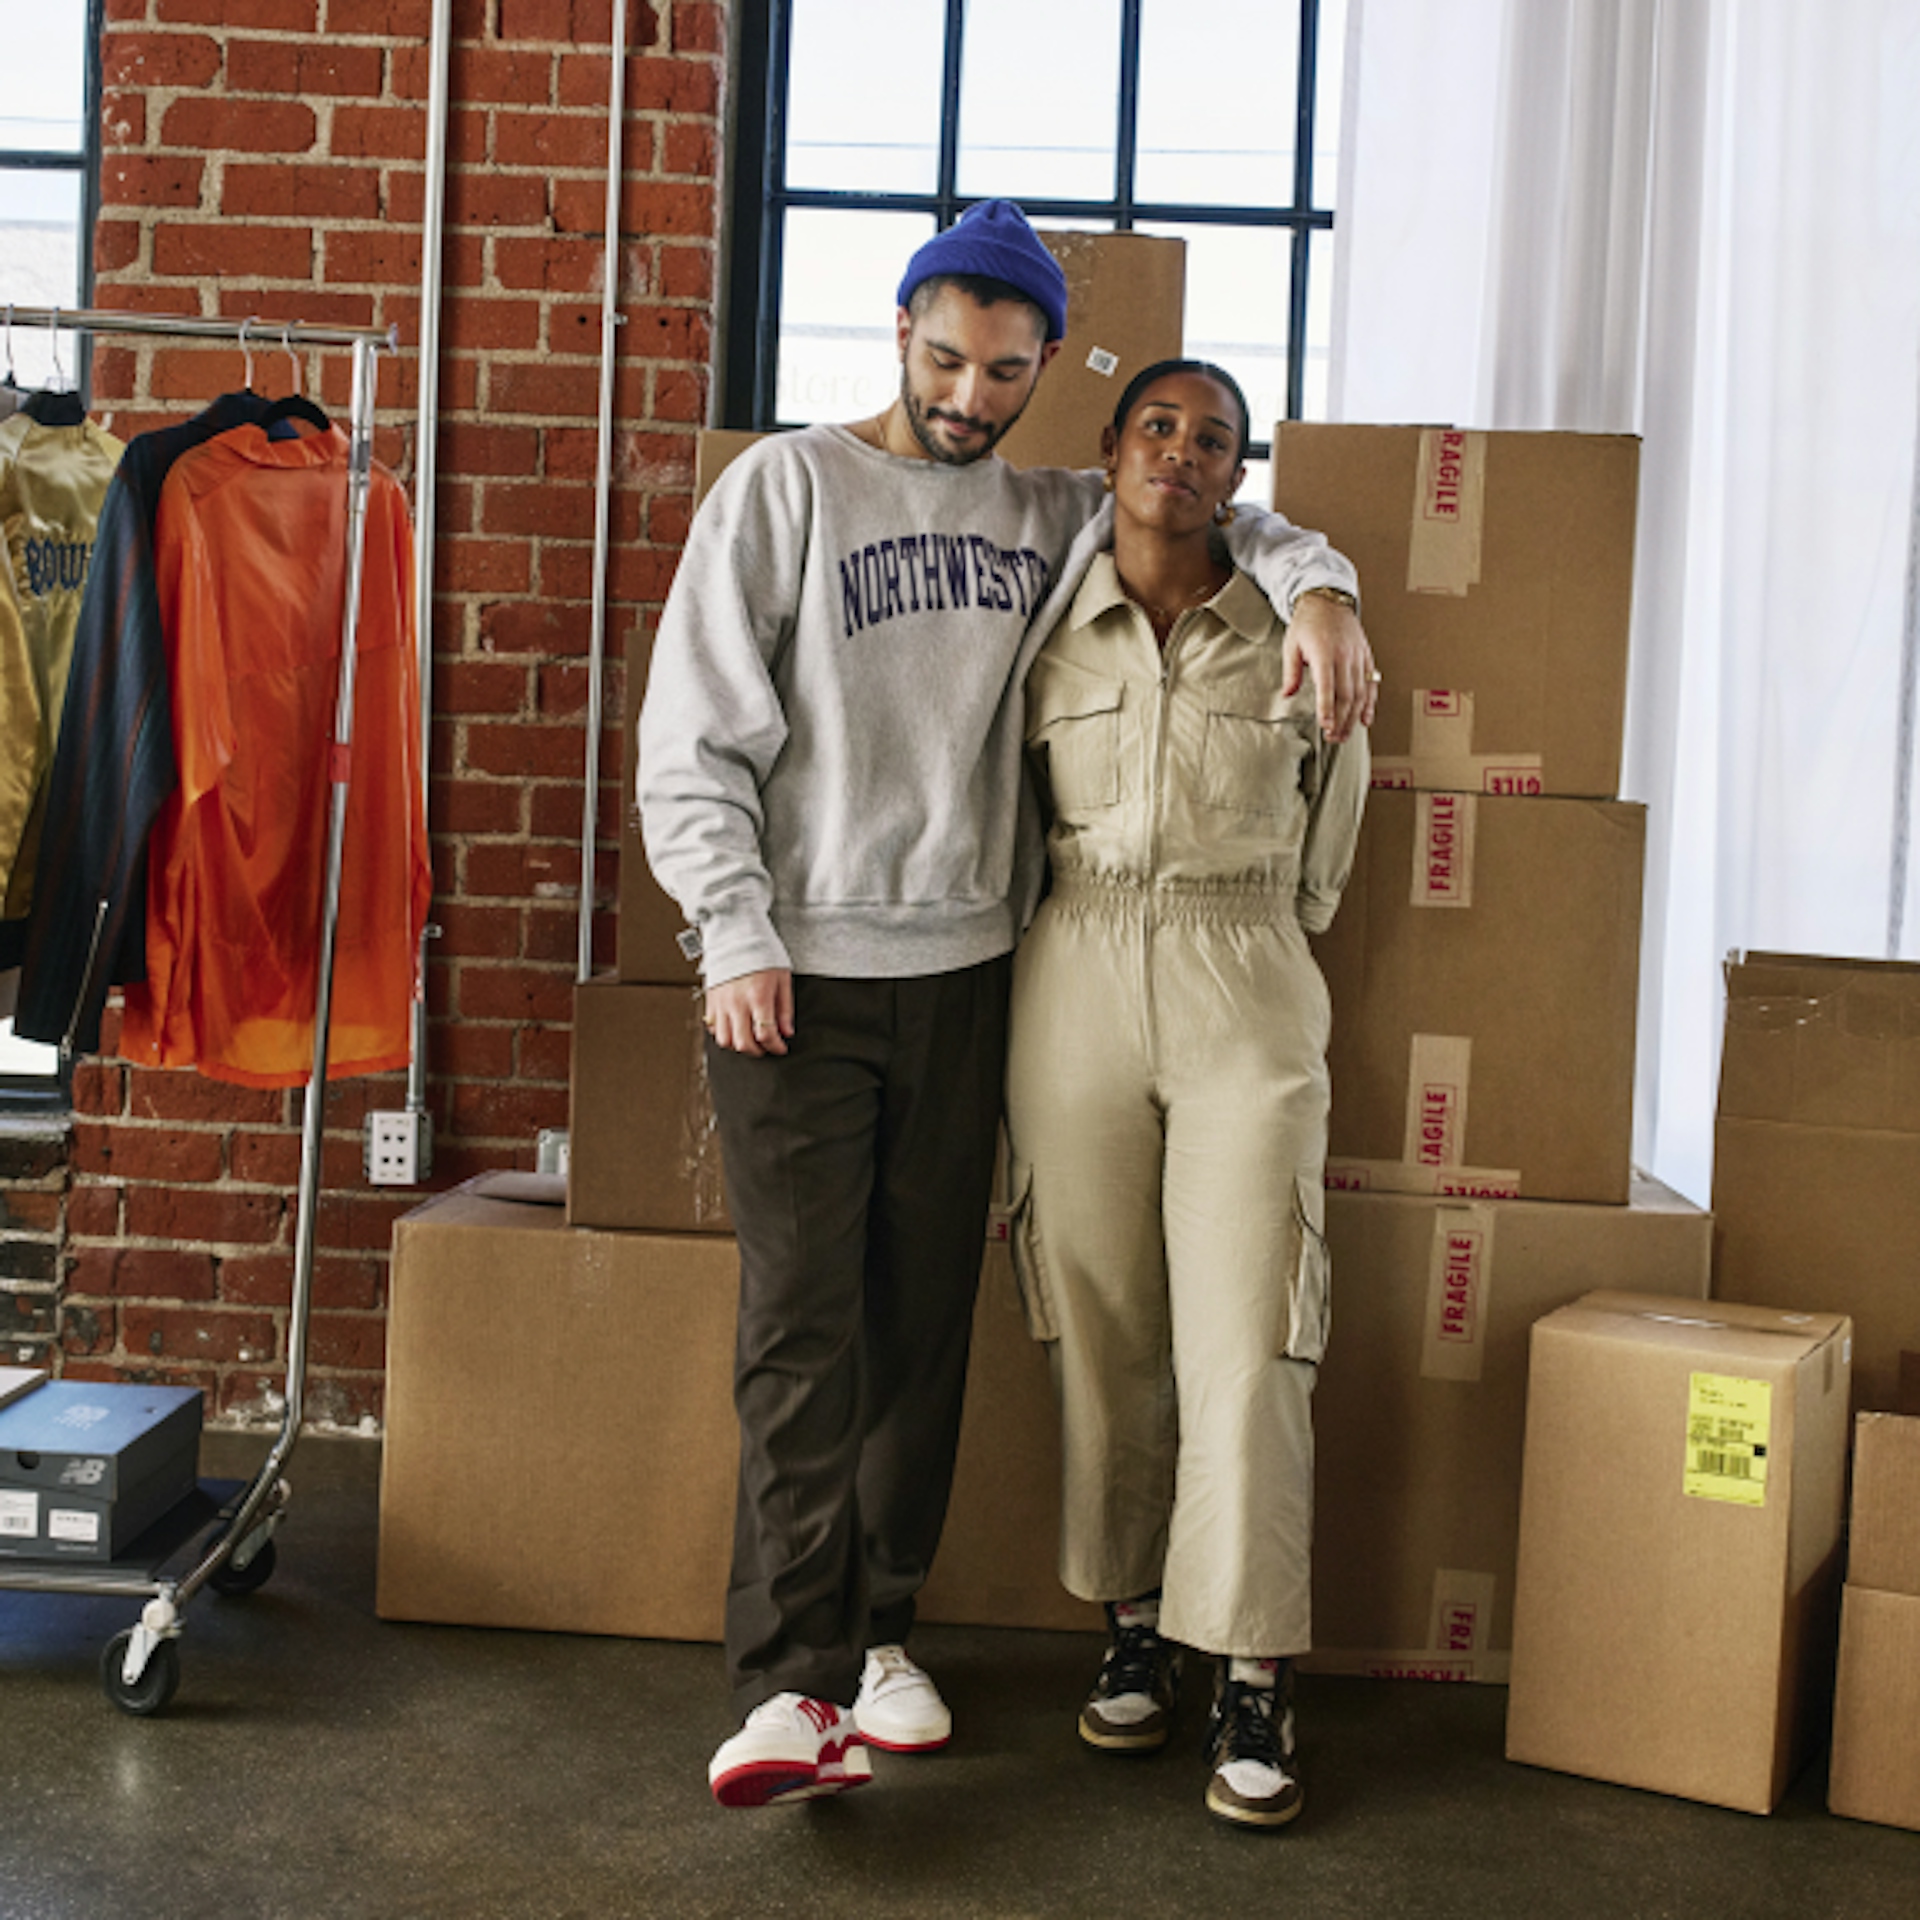 Two people stand close together in a room filled with cardboard boxes. One is wearing a grey "Northwestern" sweatshirt and a blue beanie, while the other is dressed in a beige jumpsuit. The background features a brick wall and a clothing rack with various garments, suggesting a casual and industrious setting.